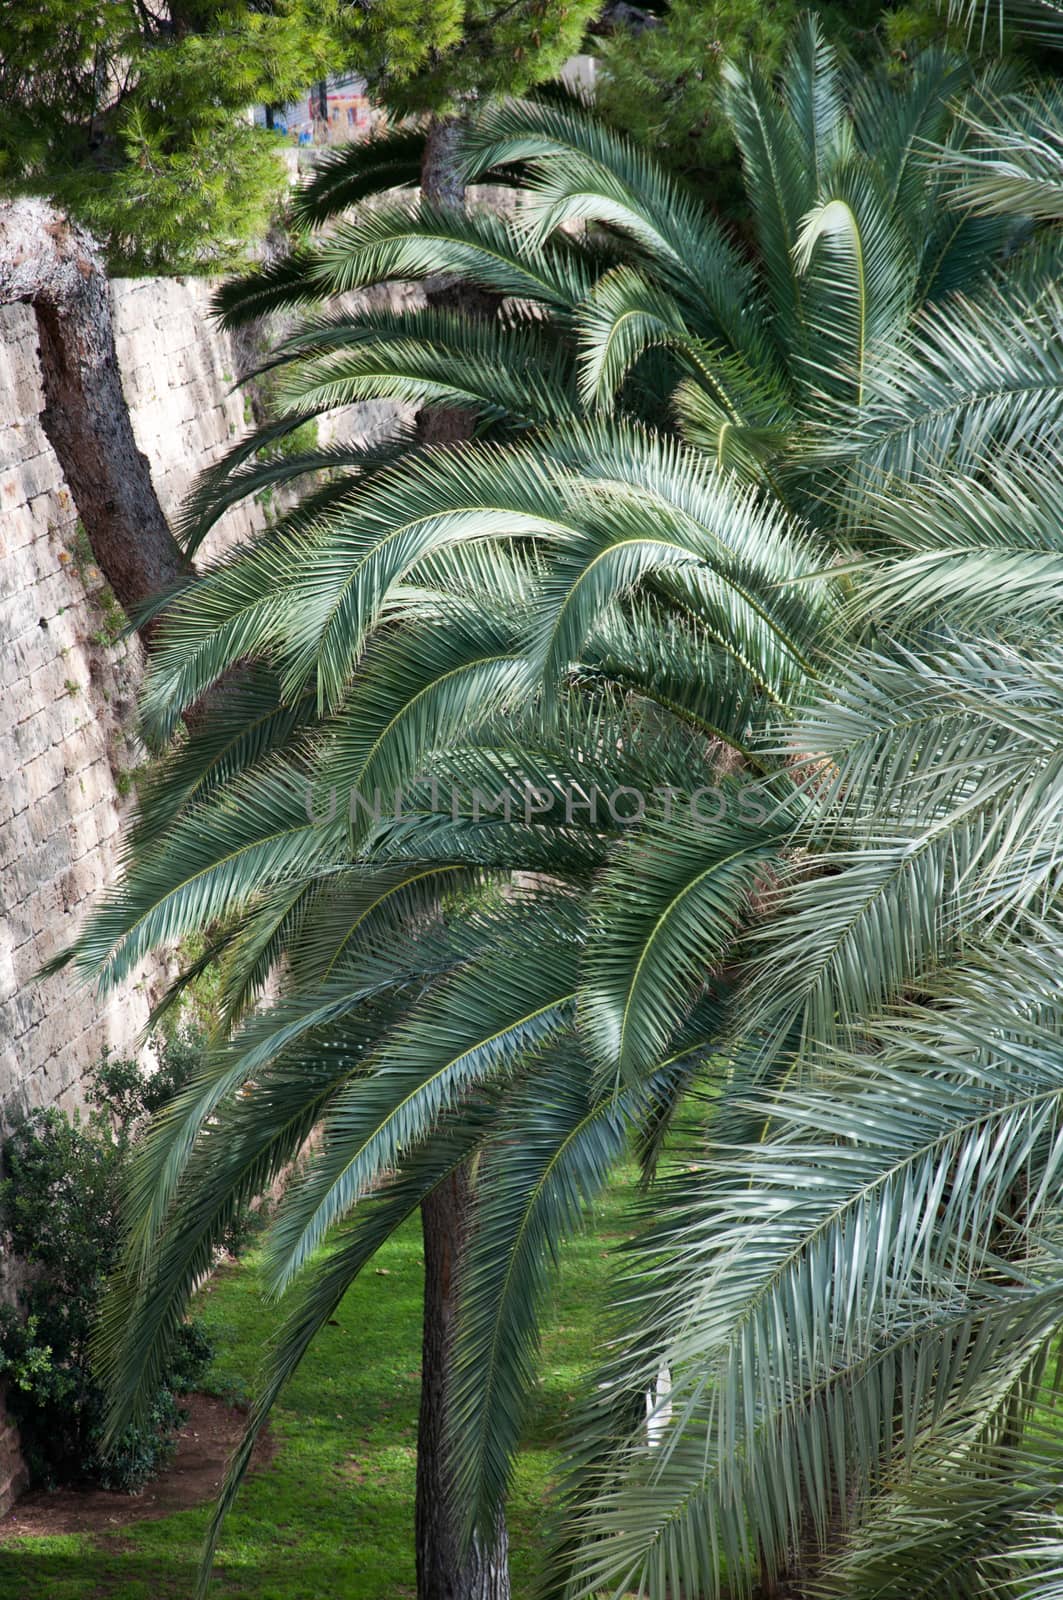 Palm branches and old stone wall in Palma de Mallorca, Majorca, Balearic islands, Spain.